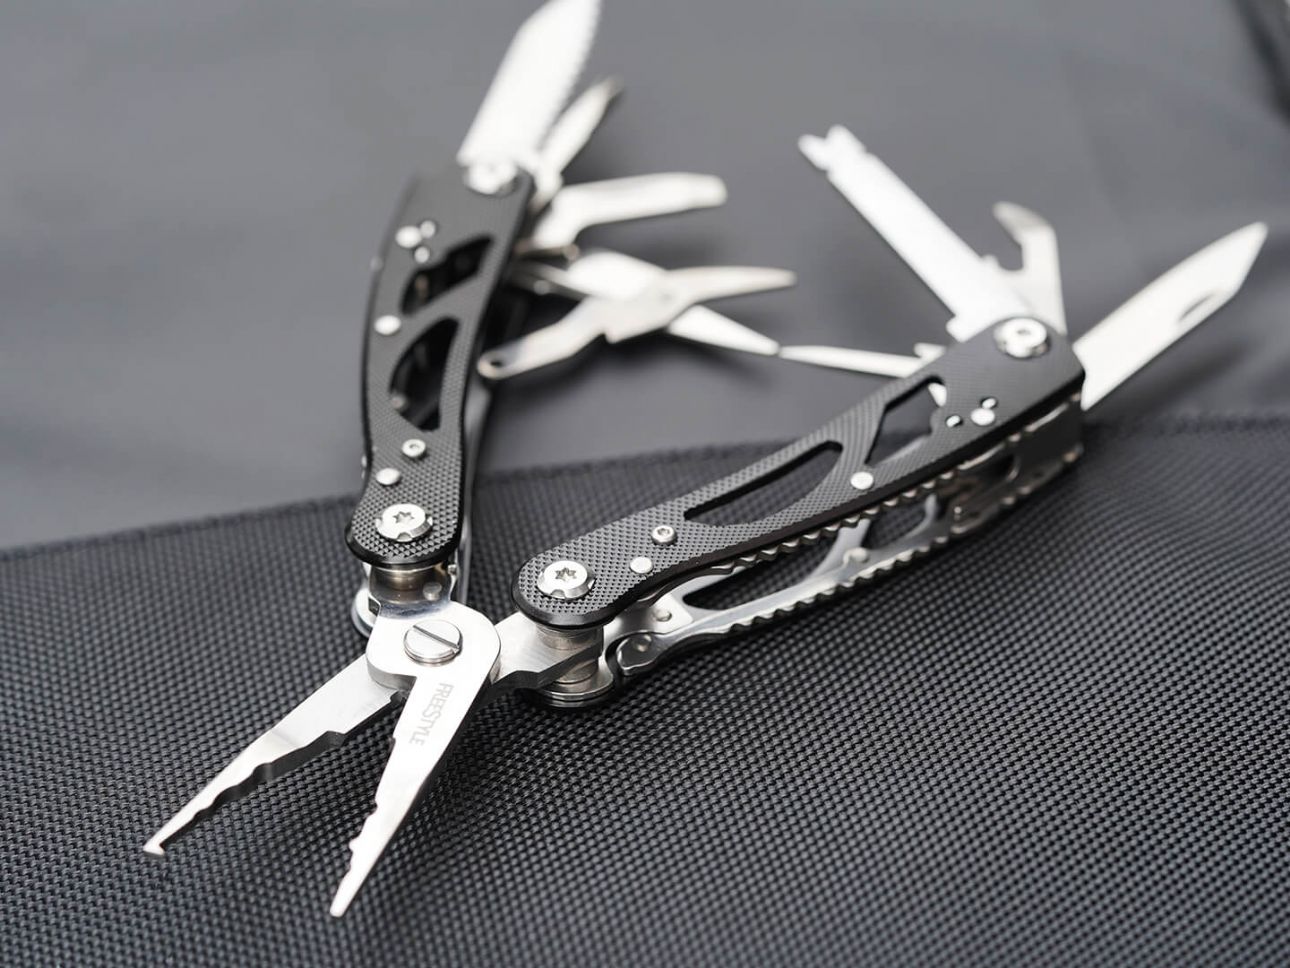 Spro Freestyle Folding 13-in-1 Multi-Tool